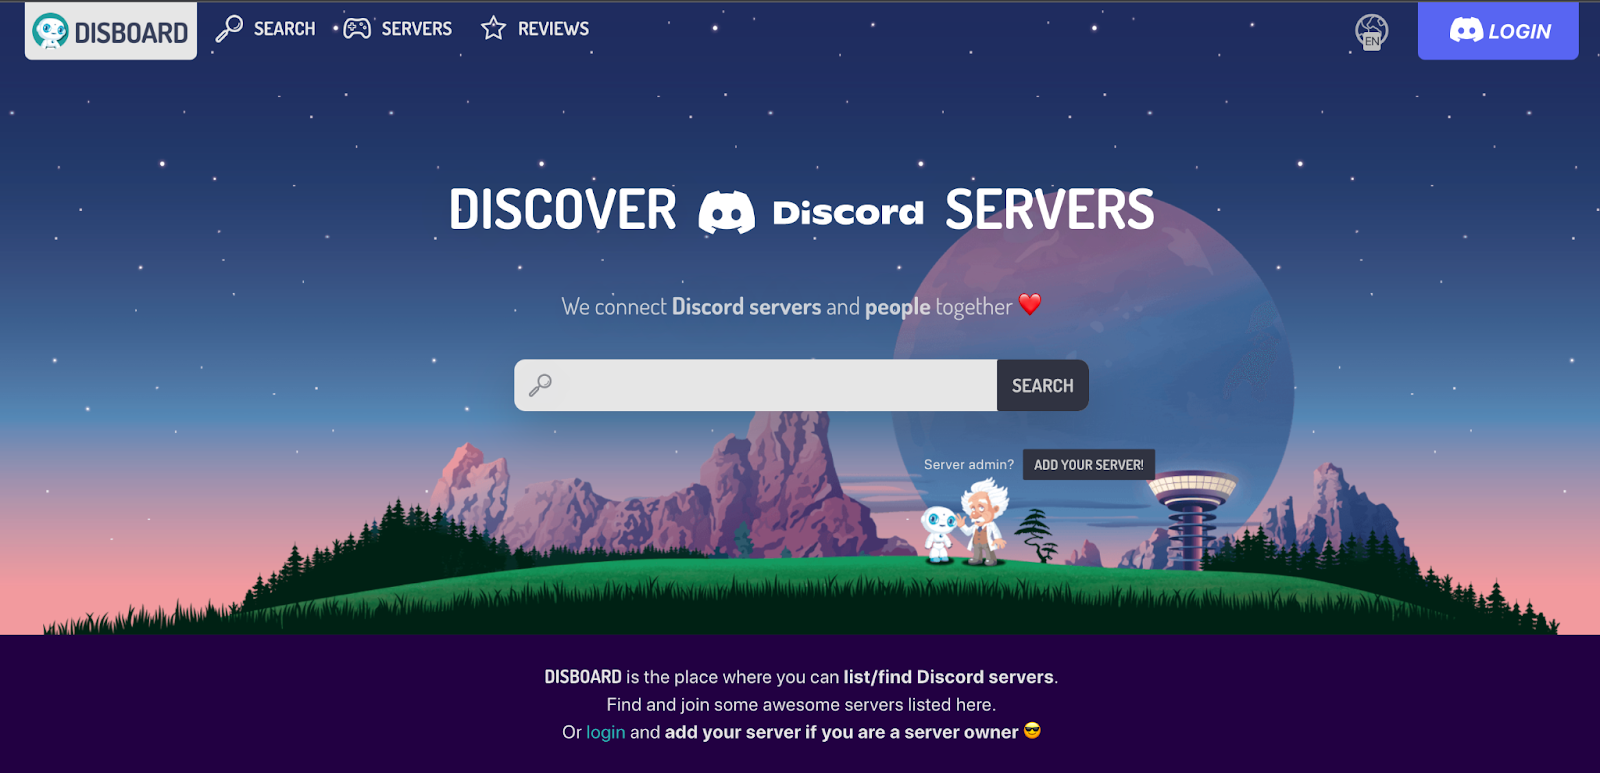 Finding Discord servers